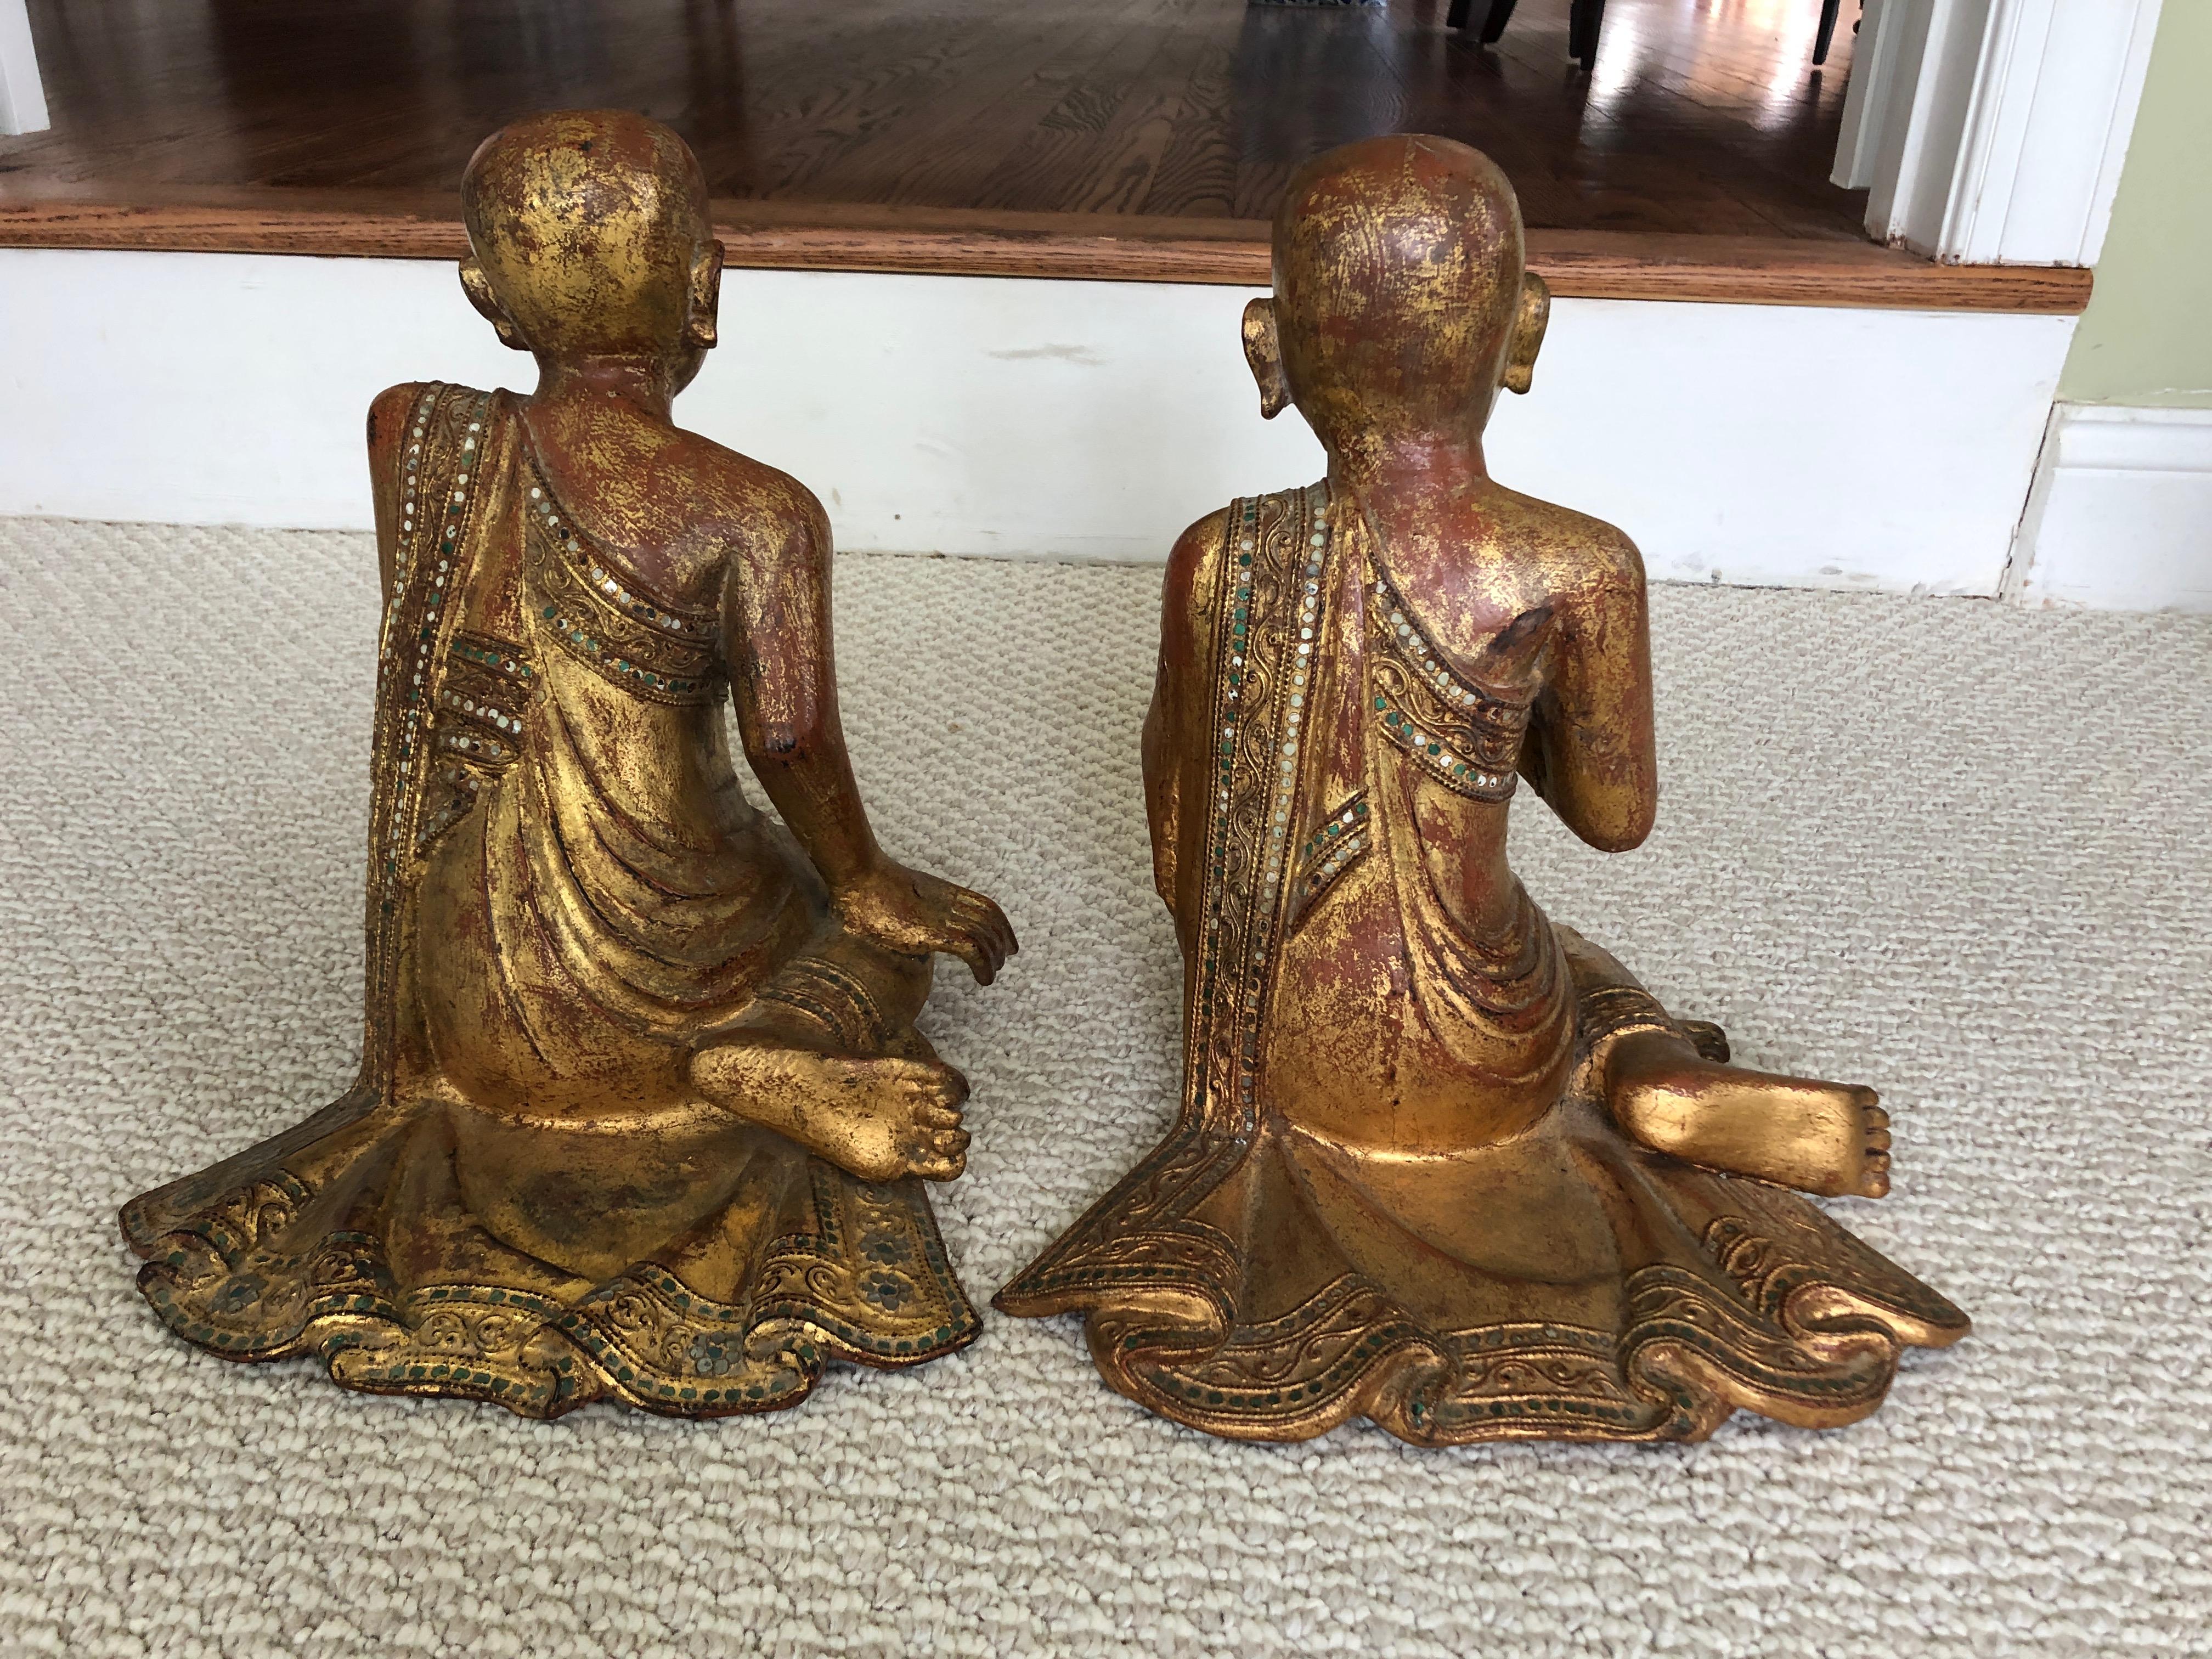 Giltwood Marvellous Pair of 19th Century Gilded and Gem Encrusted Seated Monk Sculptures